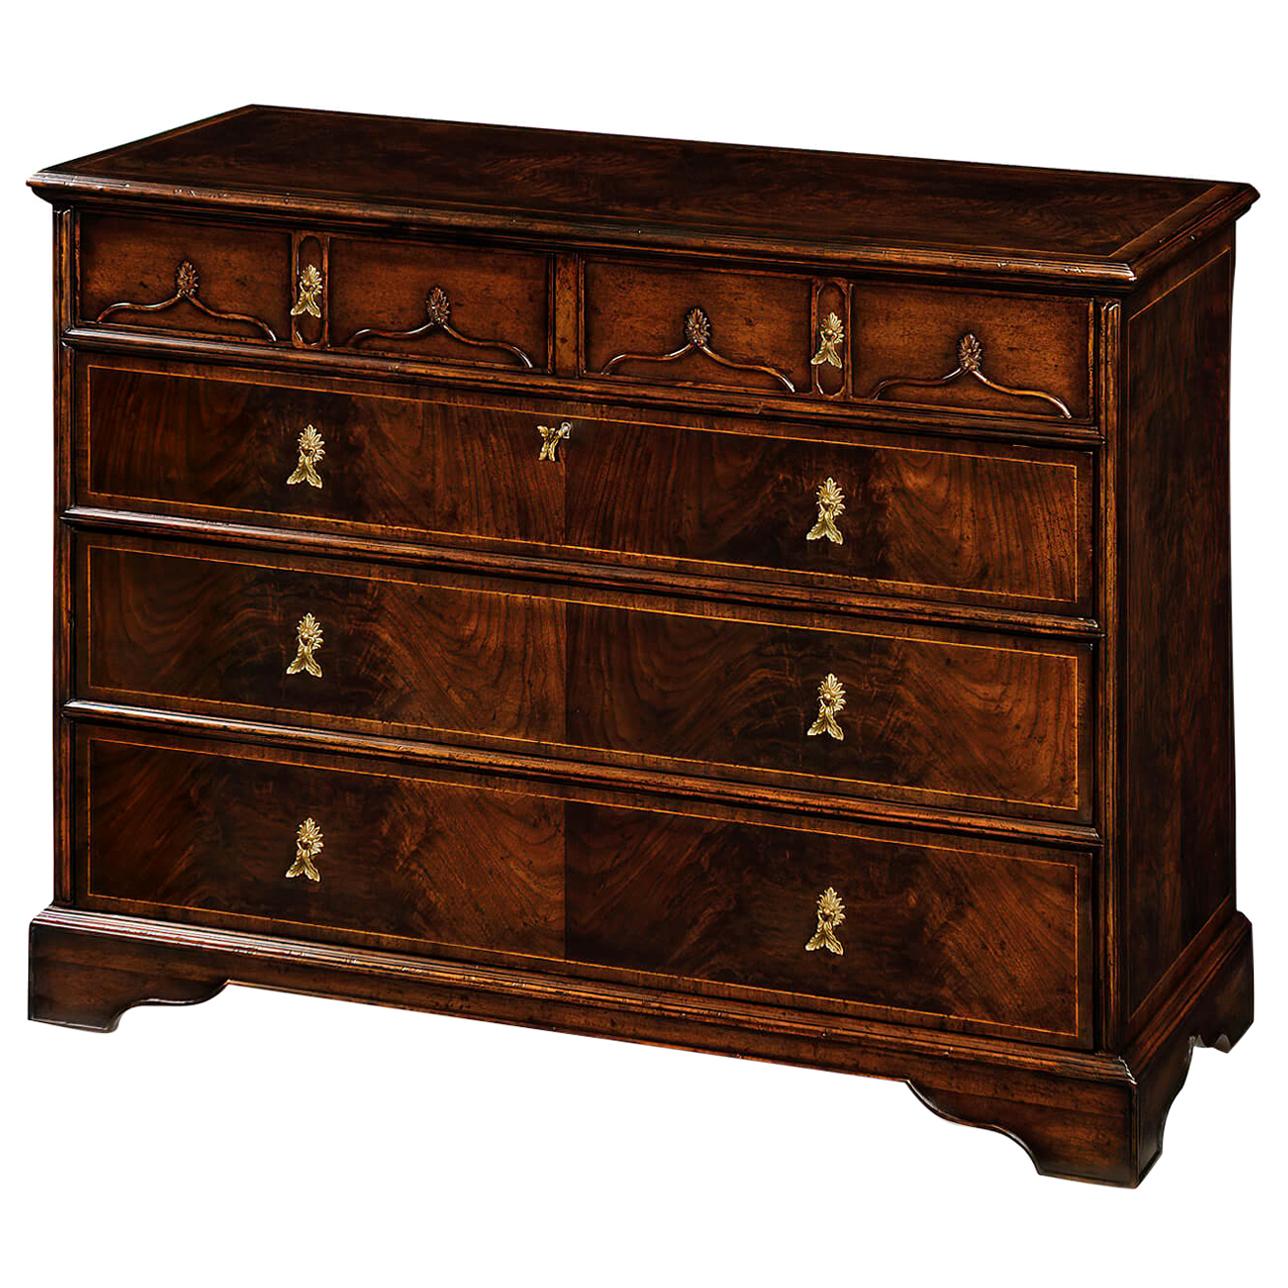 Gothic Chippendale Chest of Drawers